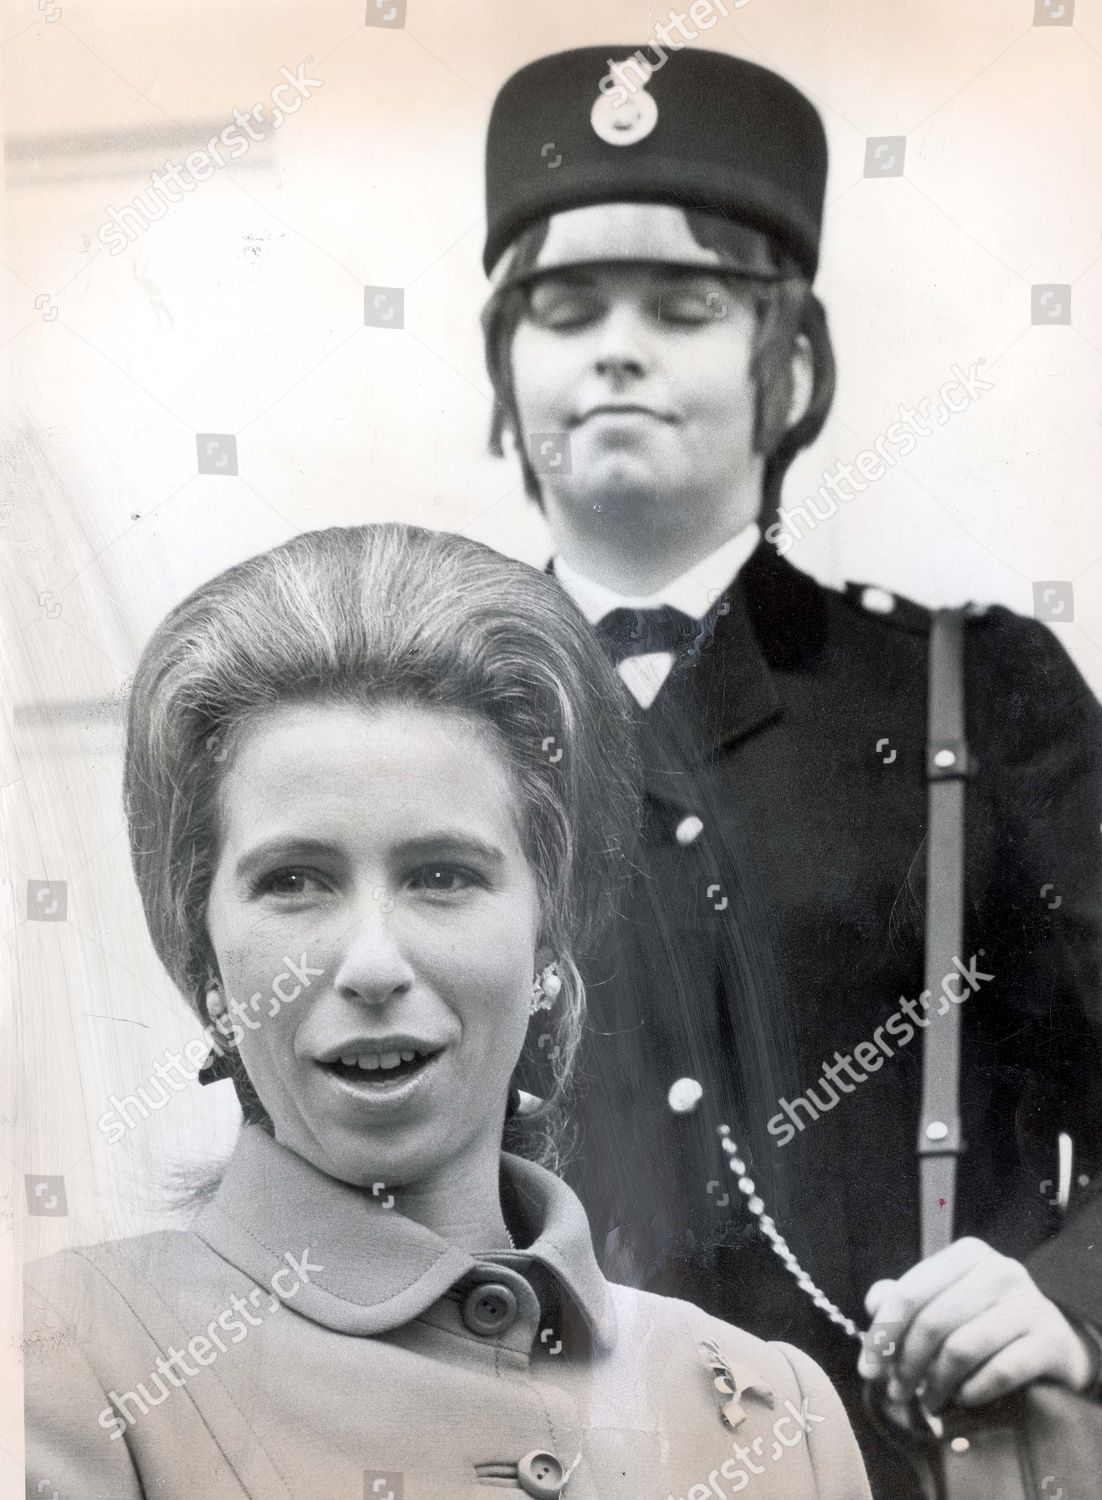 princess-anne-now-princess-royal-june-1972-opens-a-show-house-for-shelter-princess-anne-today-opened-a-show-house-for-shelter-national-campaign-for-the-homeless-at-hereford-road-bayswater-london-the-event-is-in-acknowledgement-of-the-work-b-youn-shutterstock-editorial-892392a.jpg